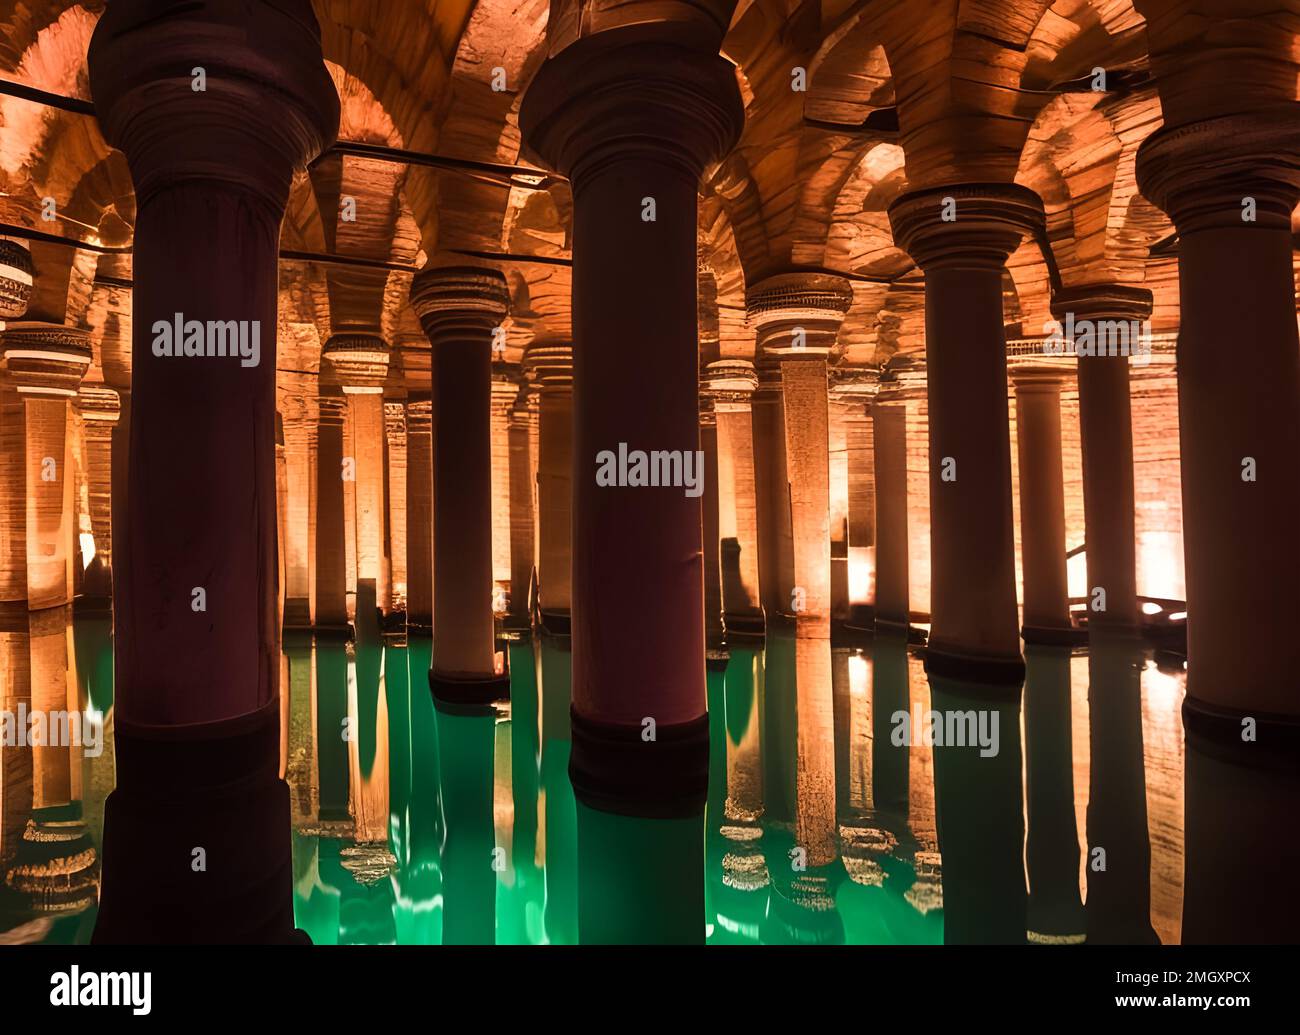 Basilica Cistern, Istanbul, Turkey depiction. One of the ancient wonders of the world. Stock Photo